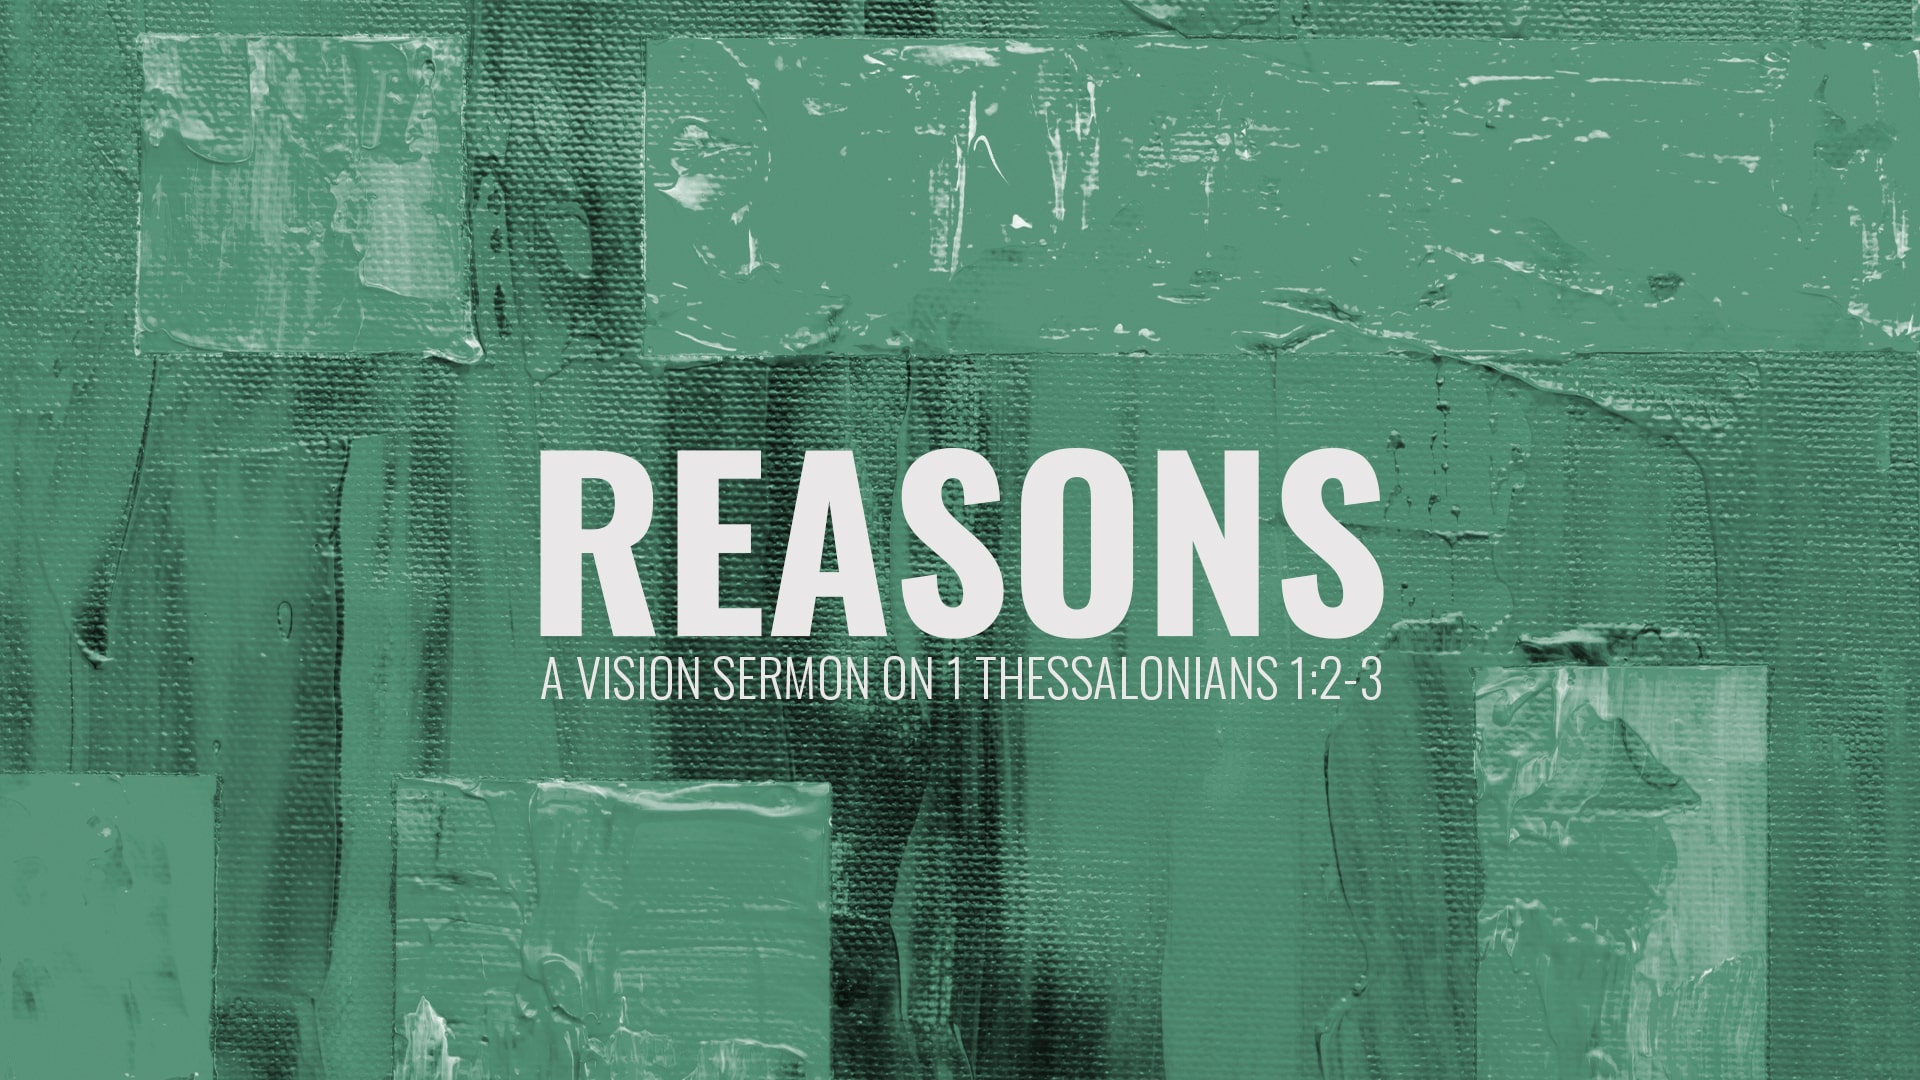 Featured image for “Reasons”